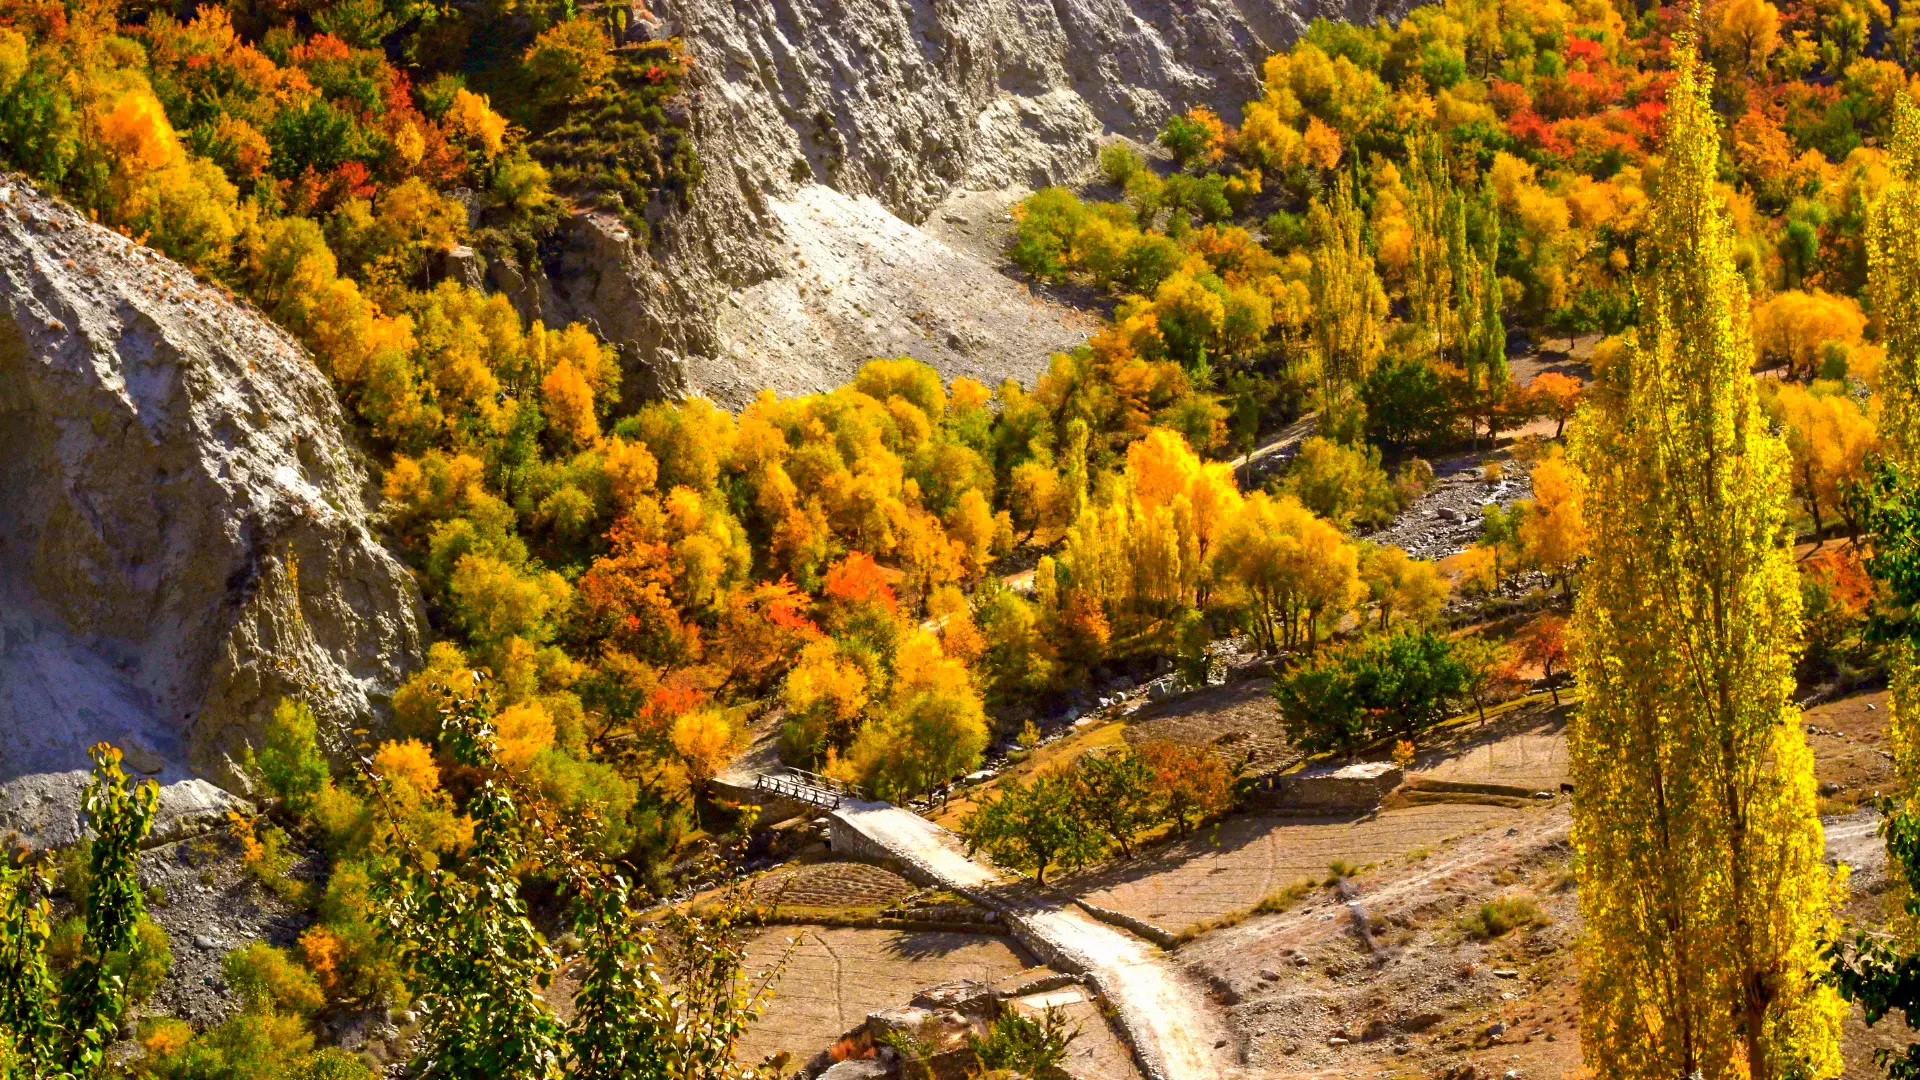 Vibrant autumn foliage in Hunza, Gilgit-Baltistan, Pakistan, with majestic mountains in the background, perfect for Travel Hunza enthusiasts.